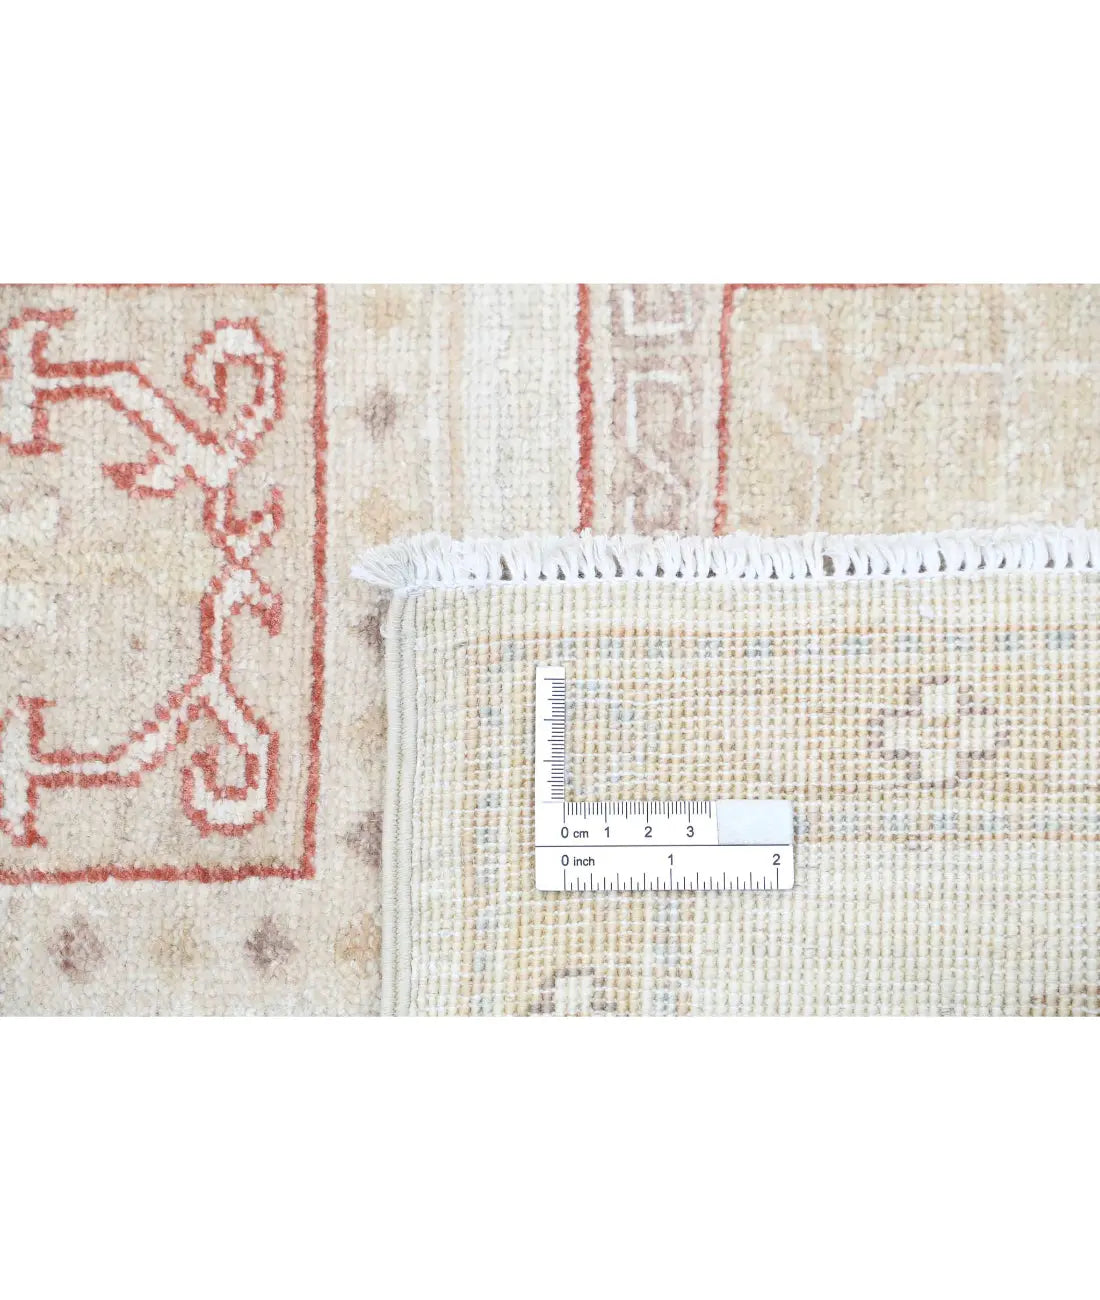 Hand Knotted Serenity Wool Rug - 5'6'' x 7'11''